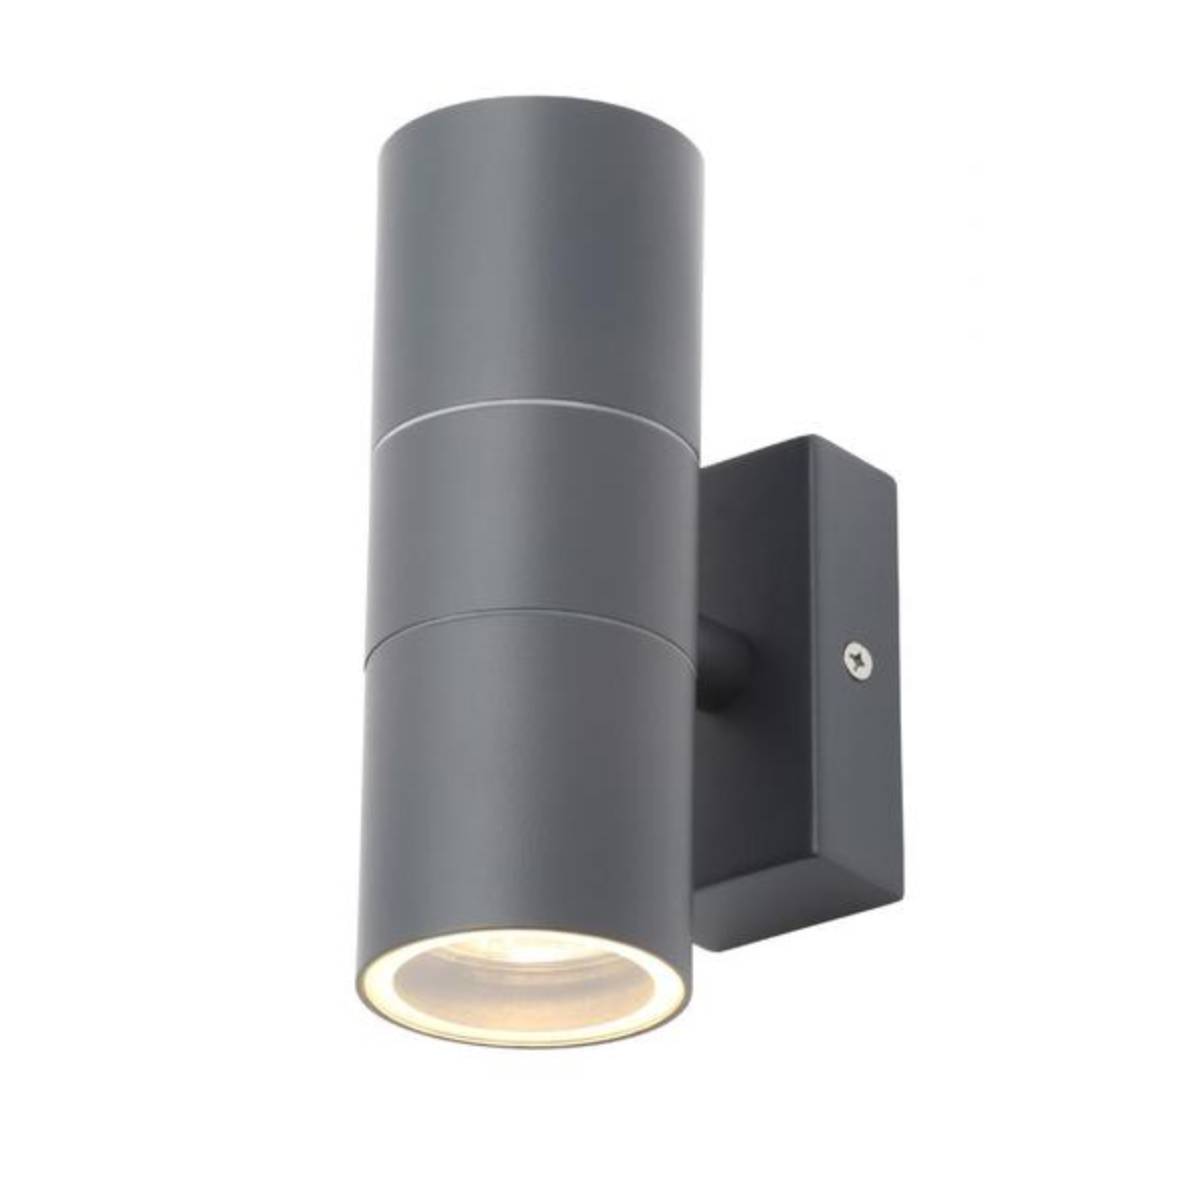 Forum Zinc ZN-20941-ANTH Leto Up/Down Wall Light - Anthracite (11982)